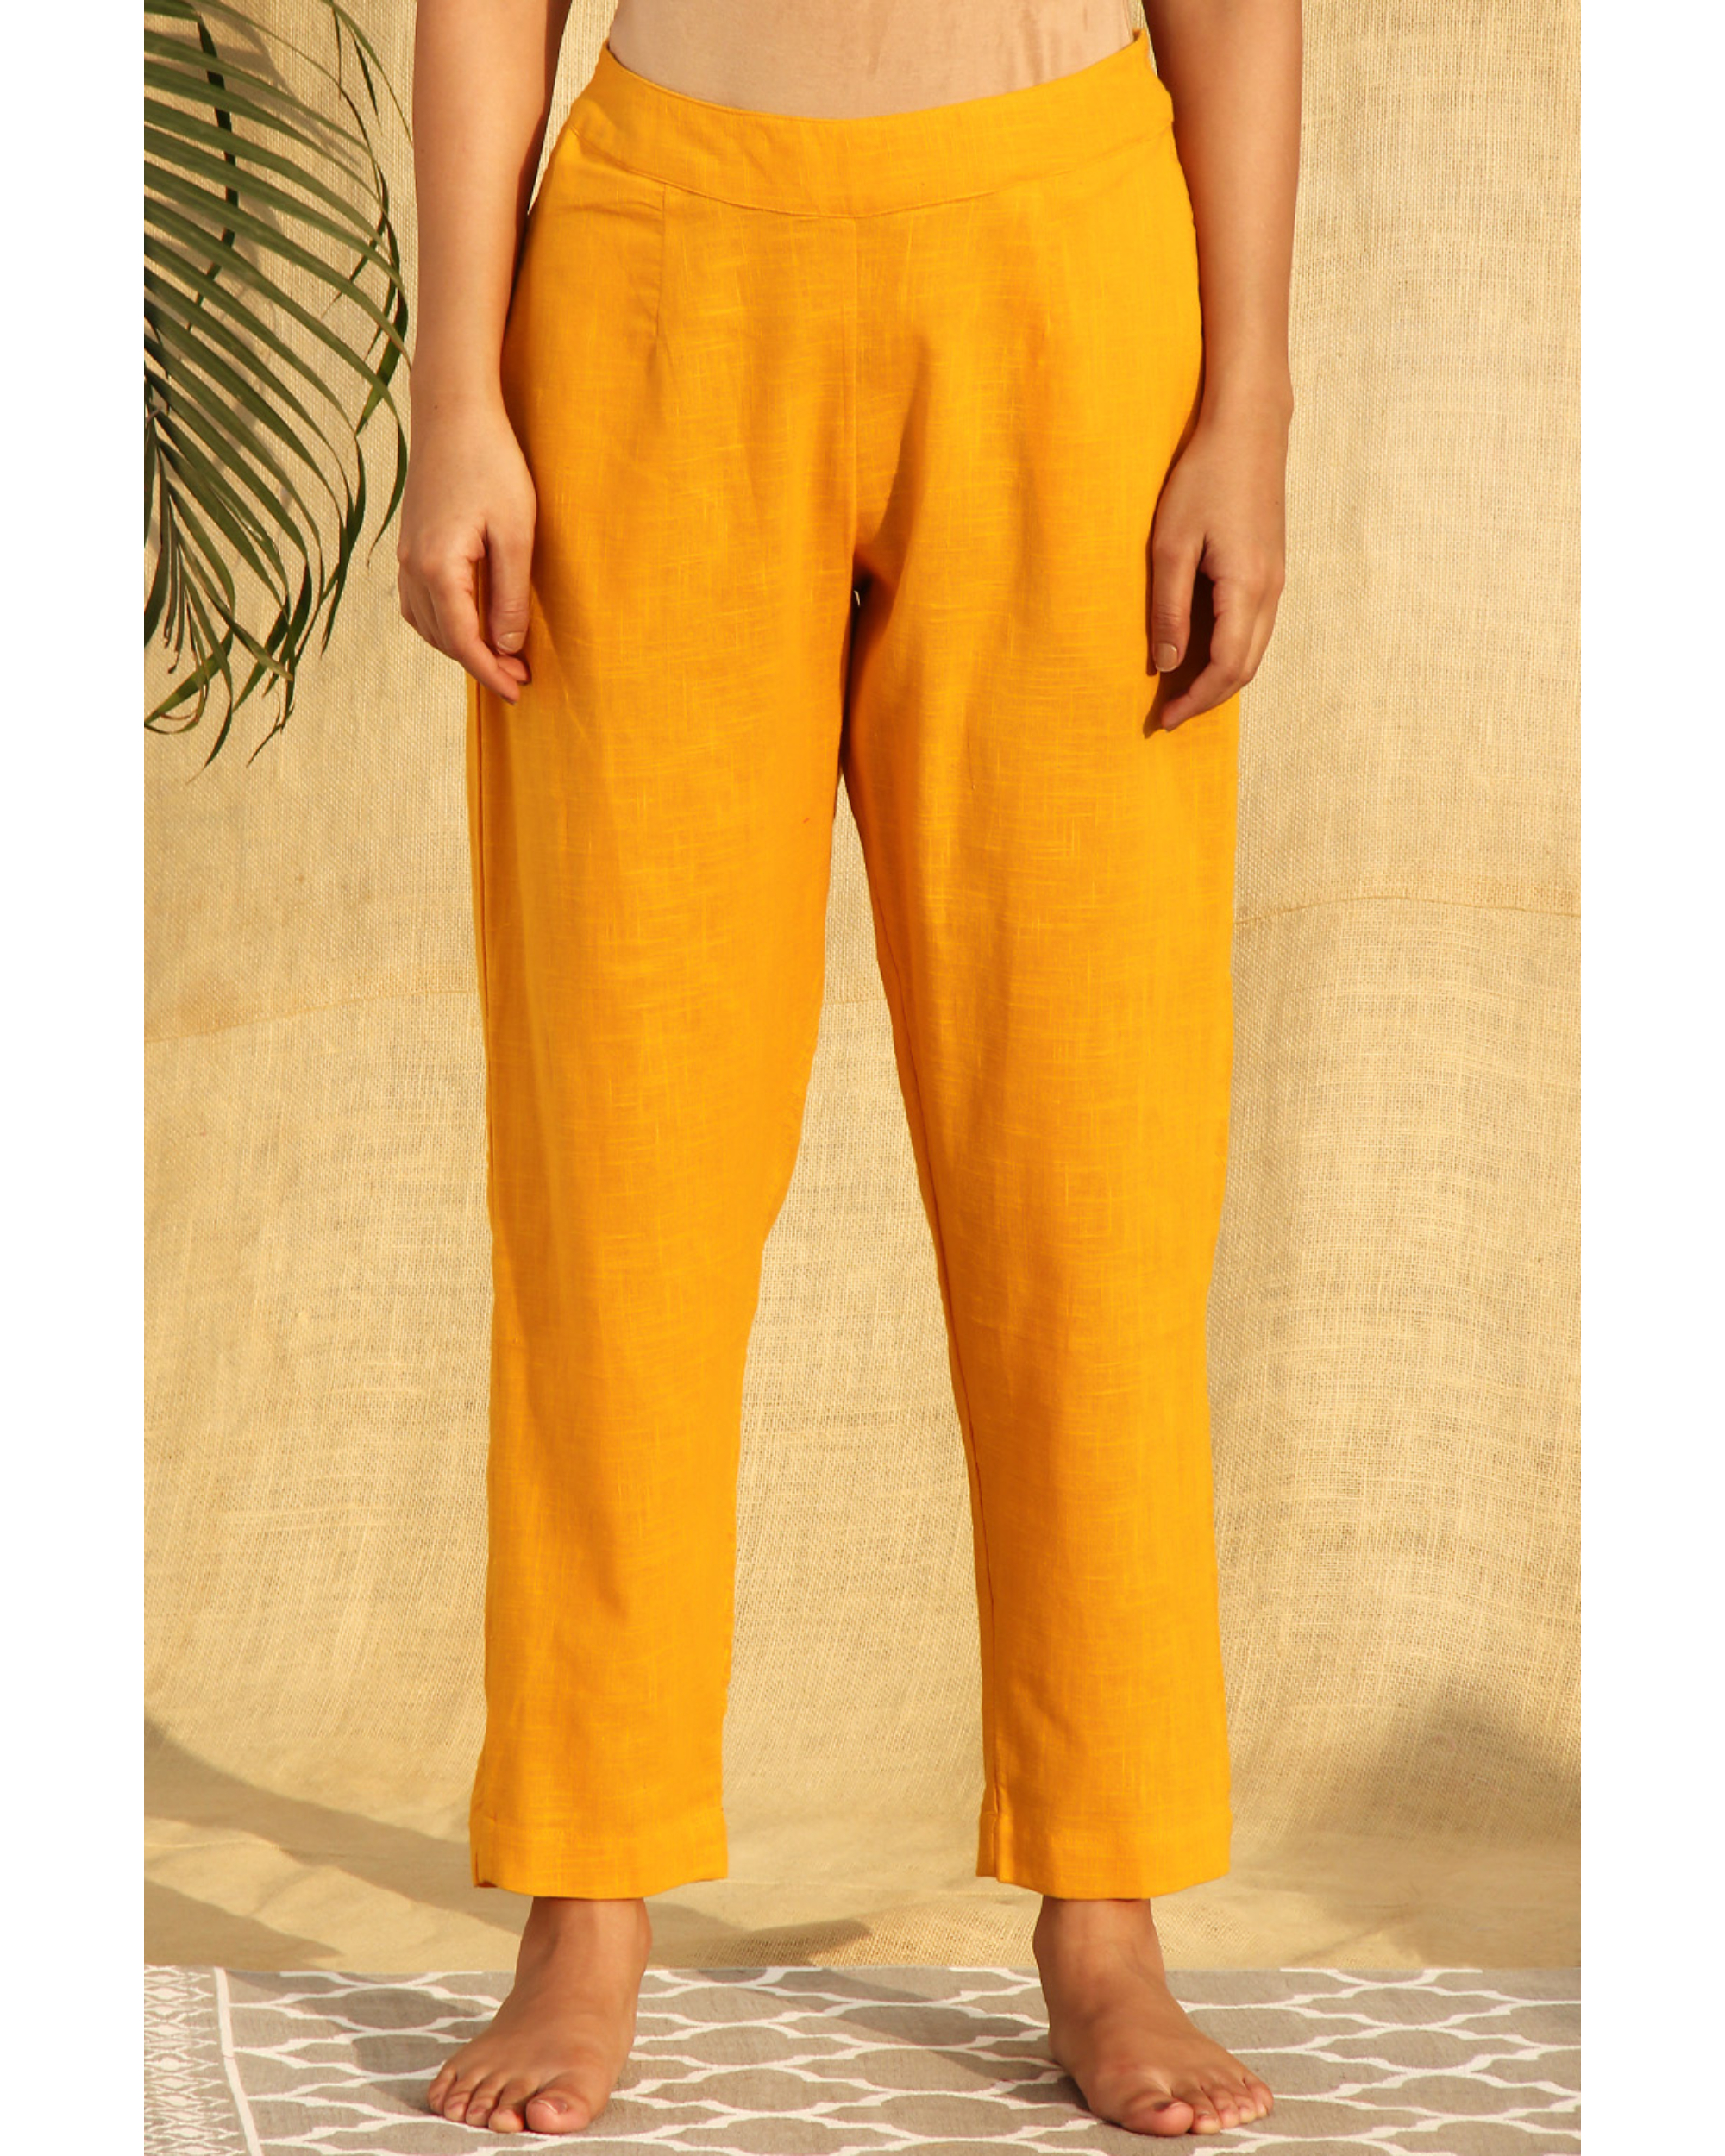 Buy Mustard Cotton Palazzo Pants () for INR749.50